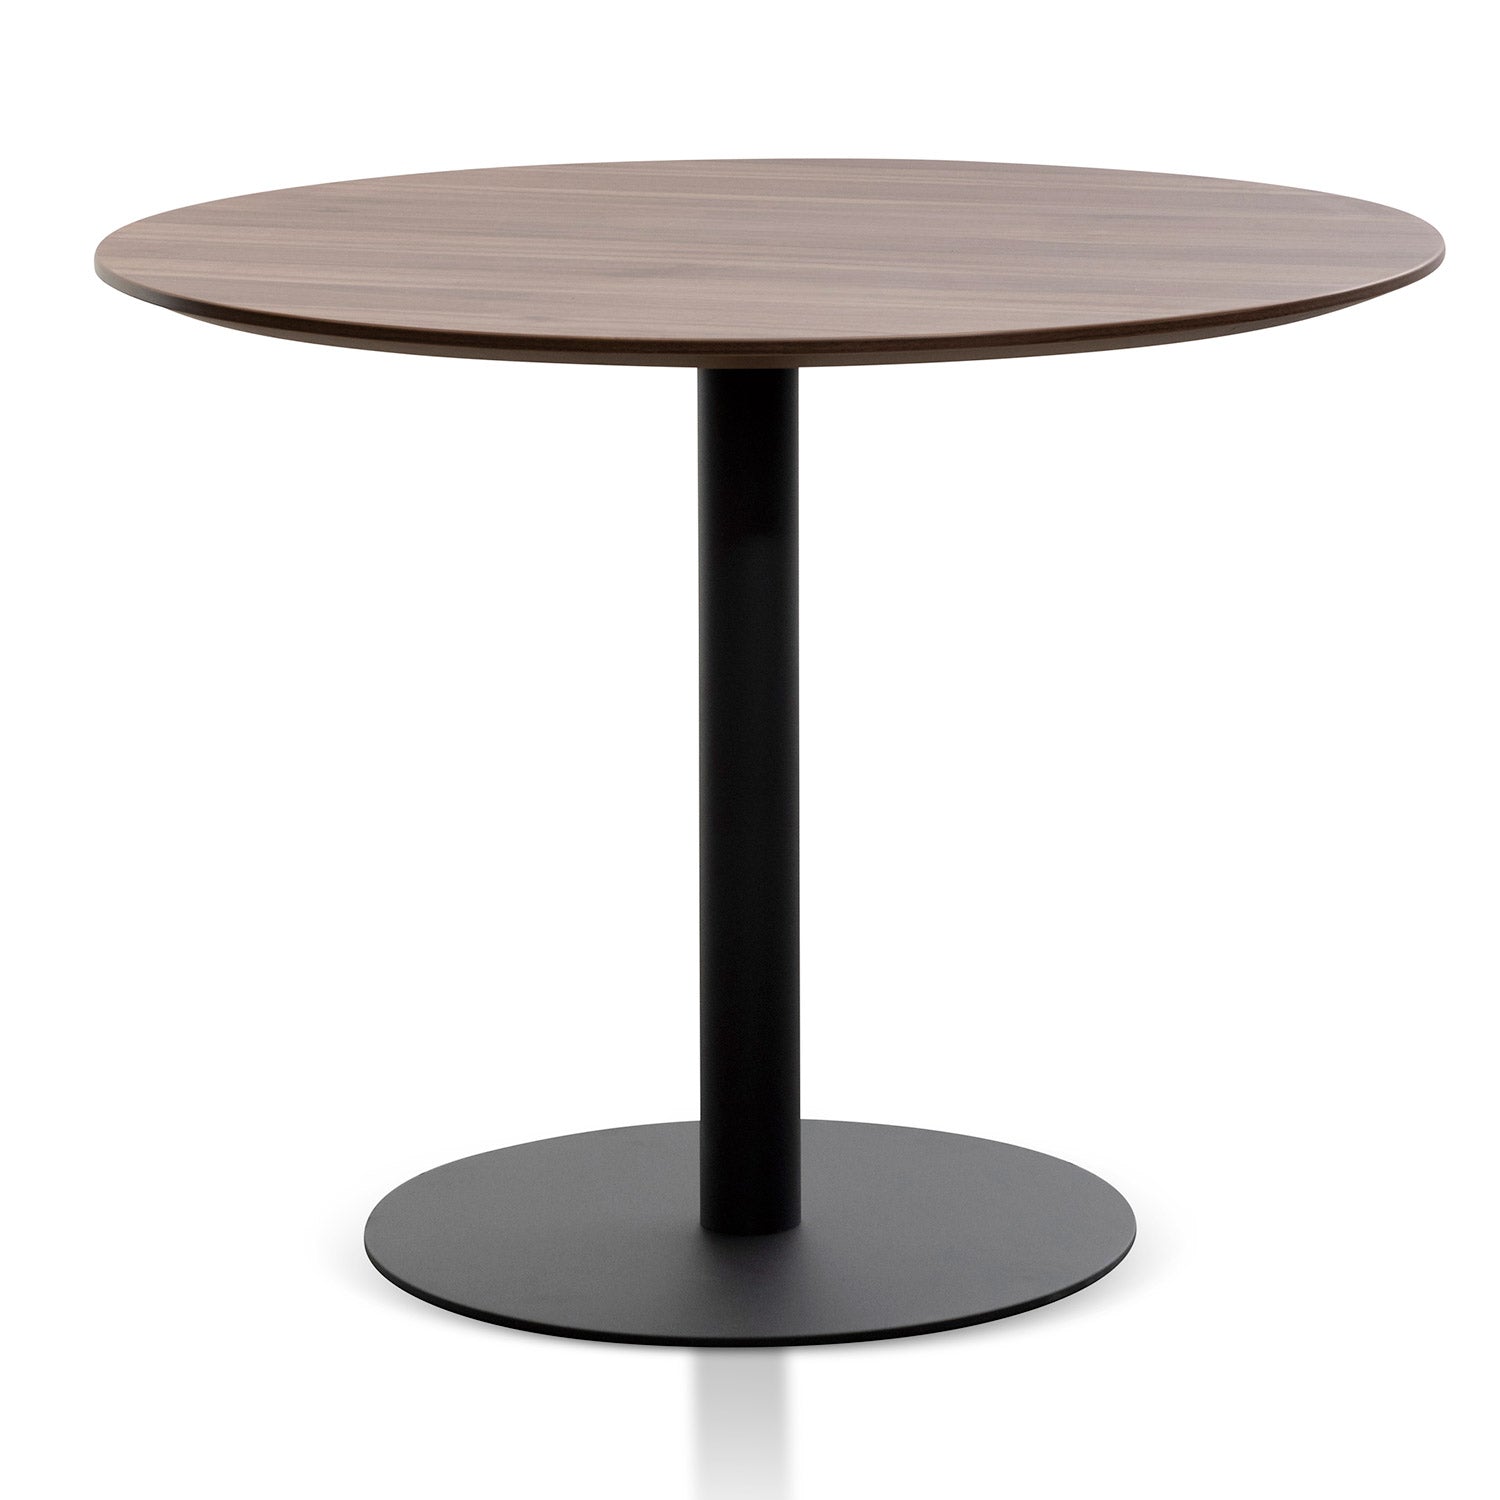 COT6167-SN Round Office Meeting Table – Walnut with Black Base